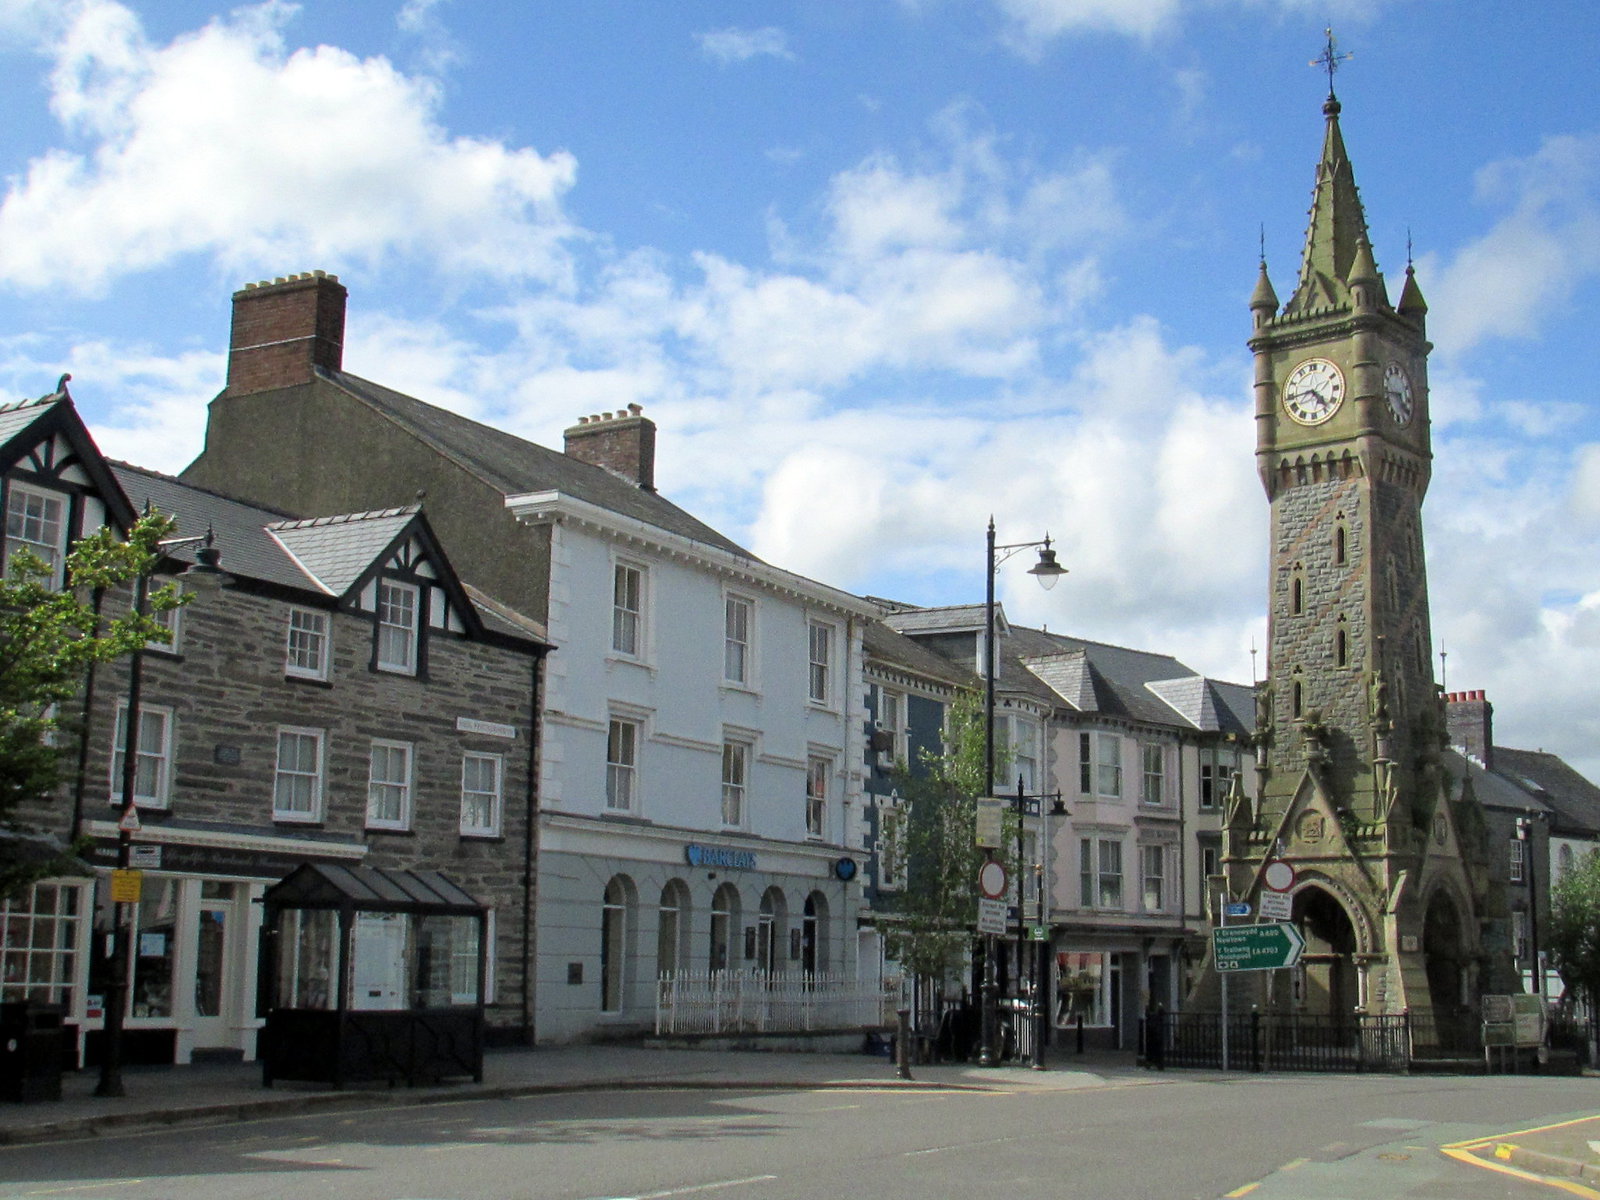 Buildings and a clocktower in Machynlleth, mid-Wales.